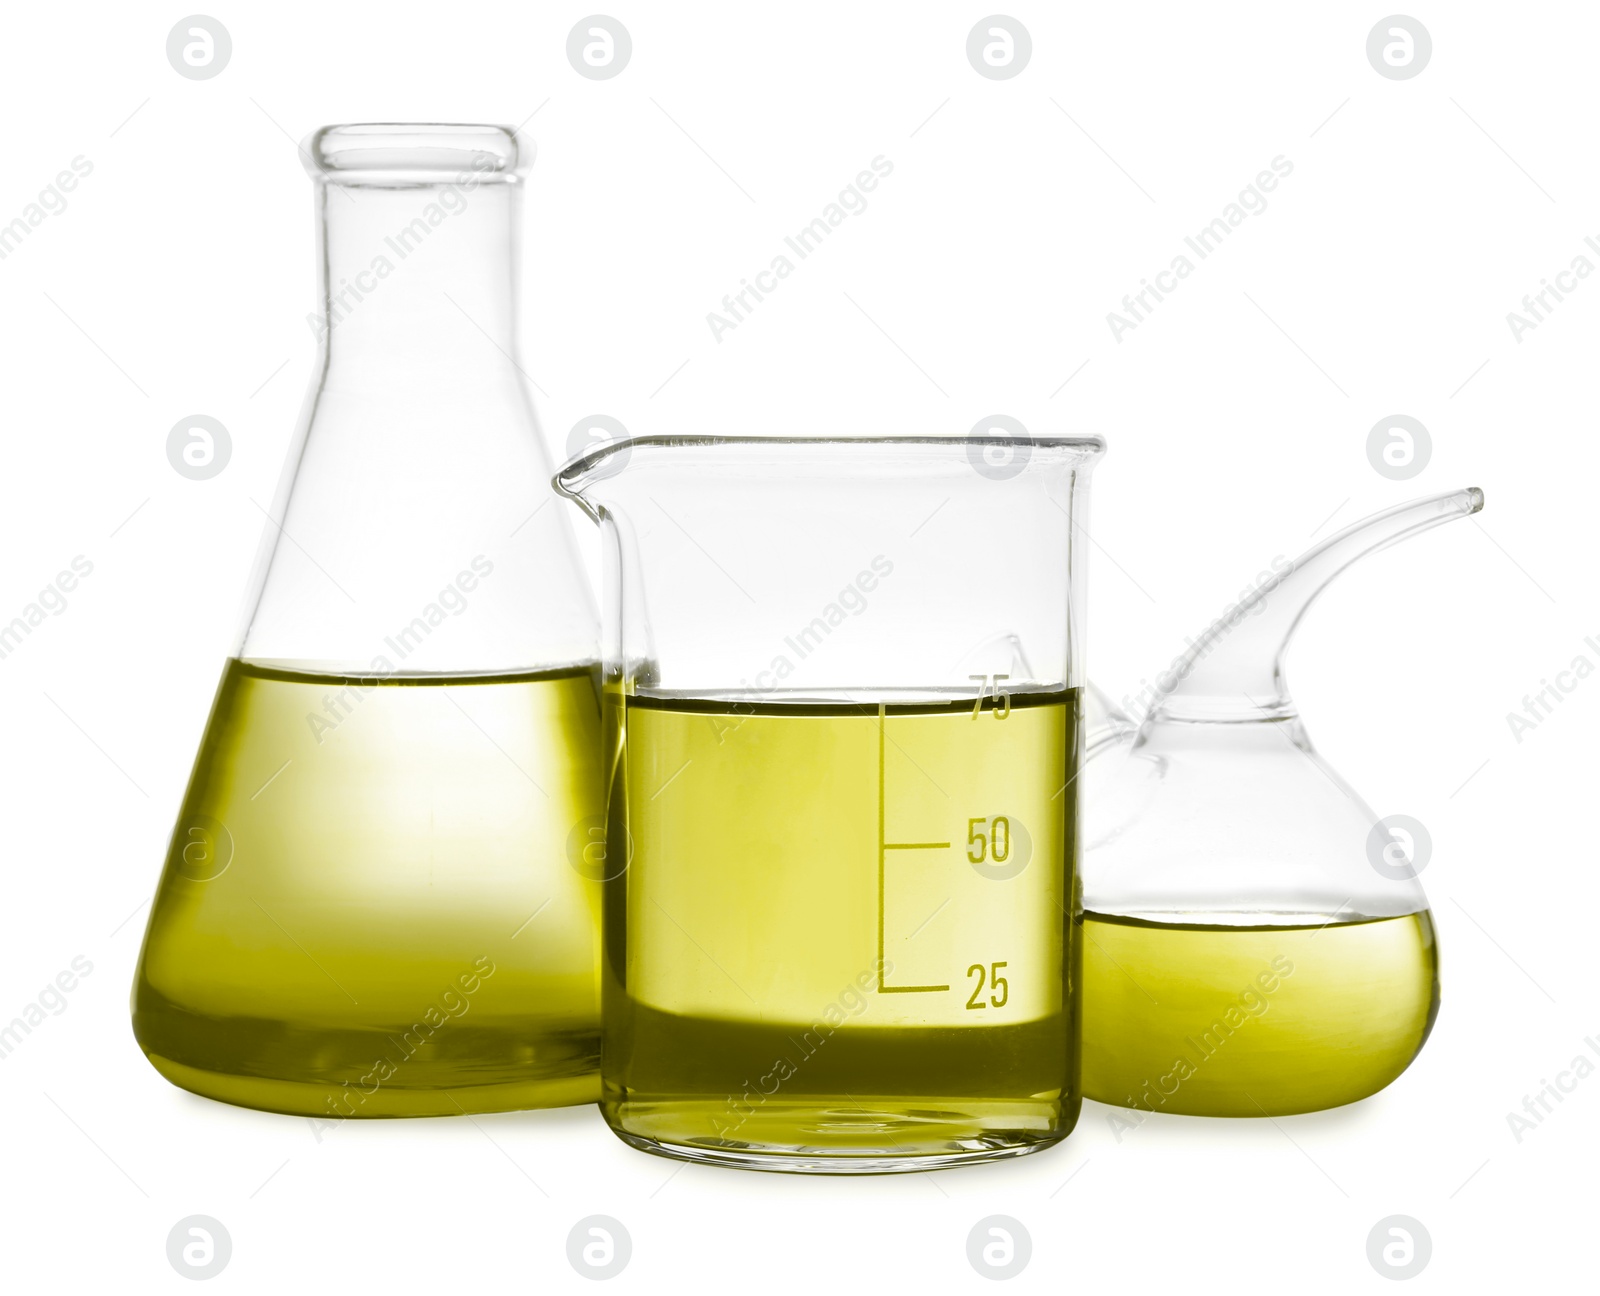 Image of Laboratory glassware with yellow liquid isolated on white